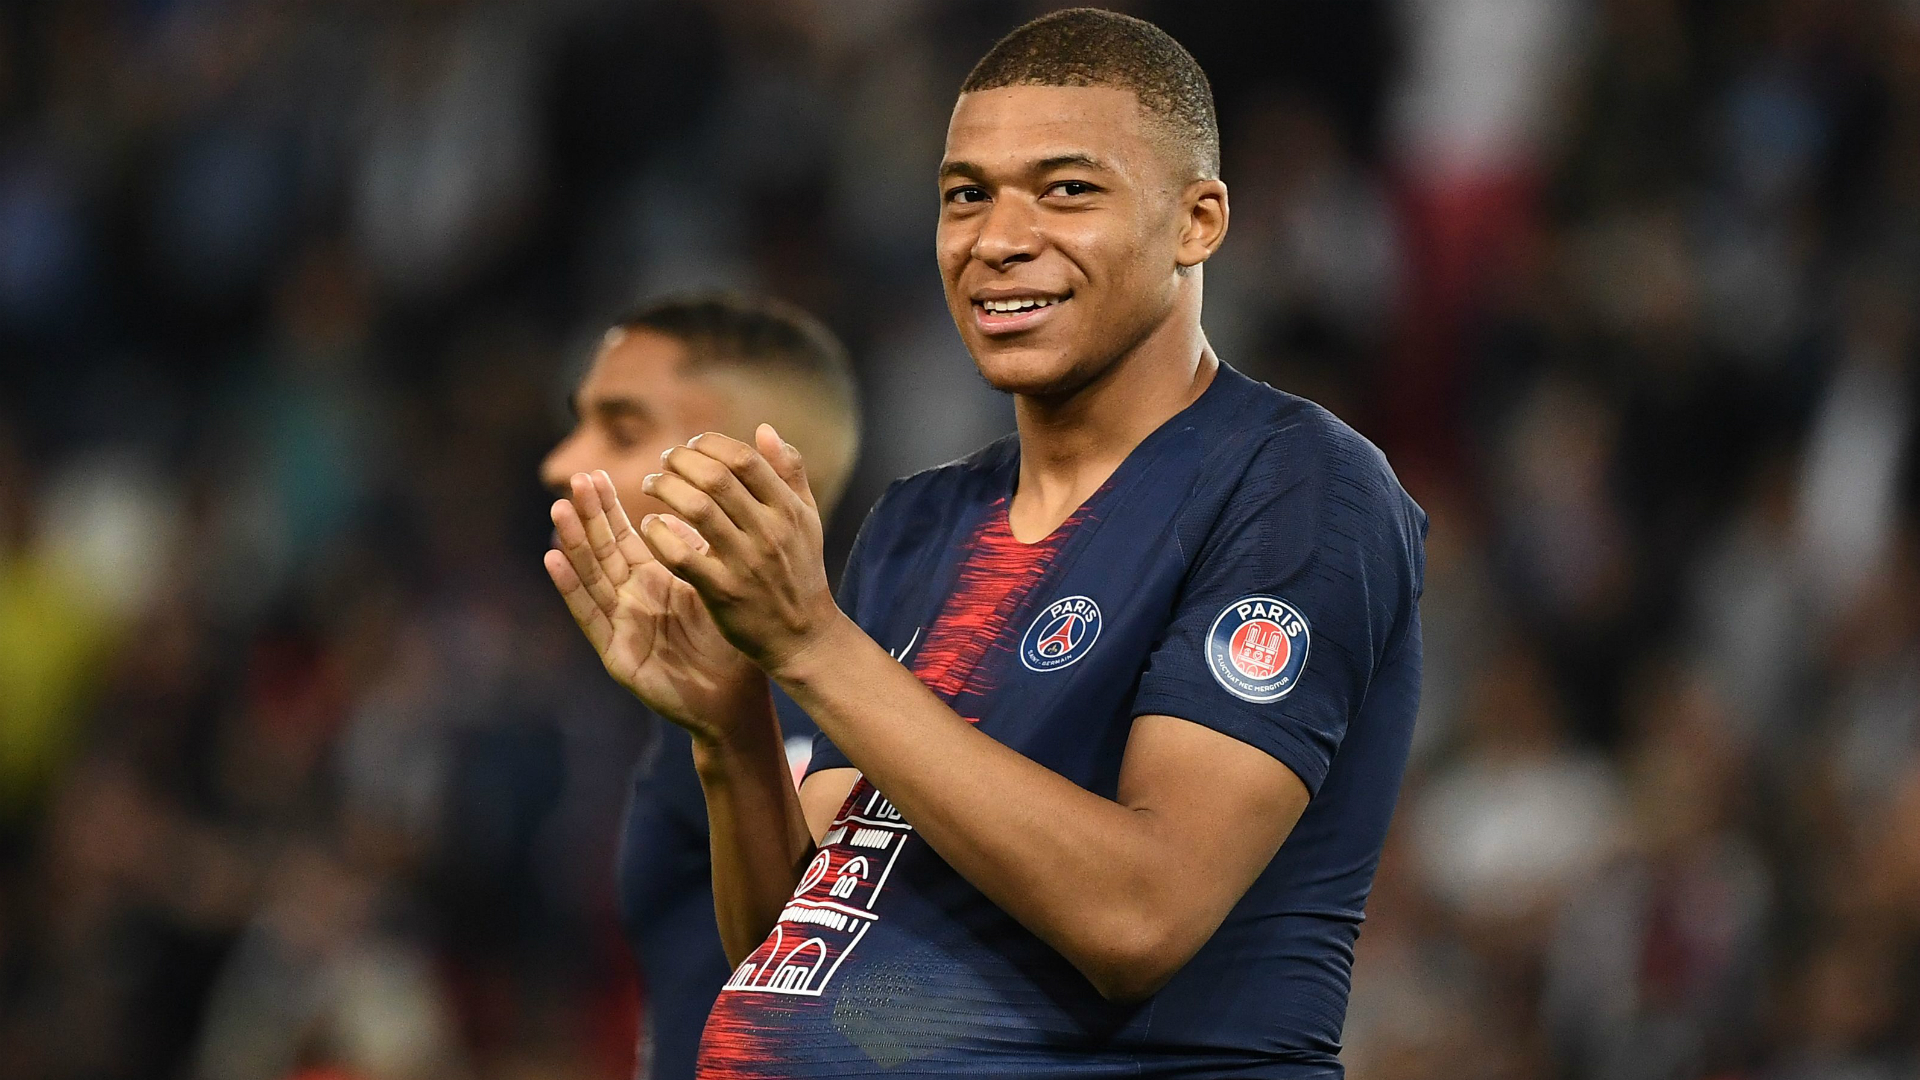 Paris Saint-Germain head coach Thomas Tuchel said there will be opportunities for clubs to sign Kylian Mbappe in the transfer window.